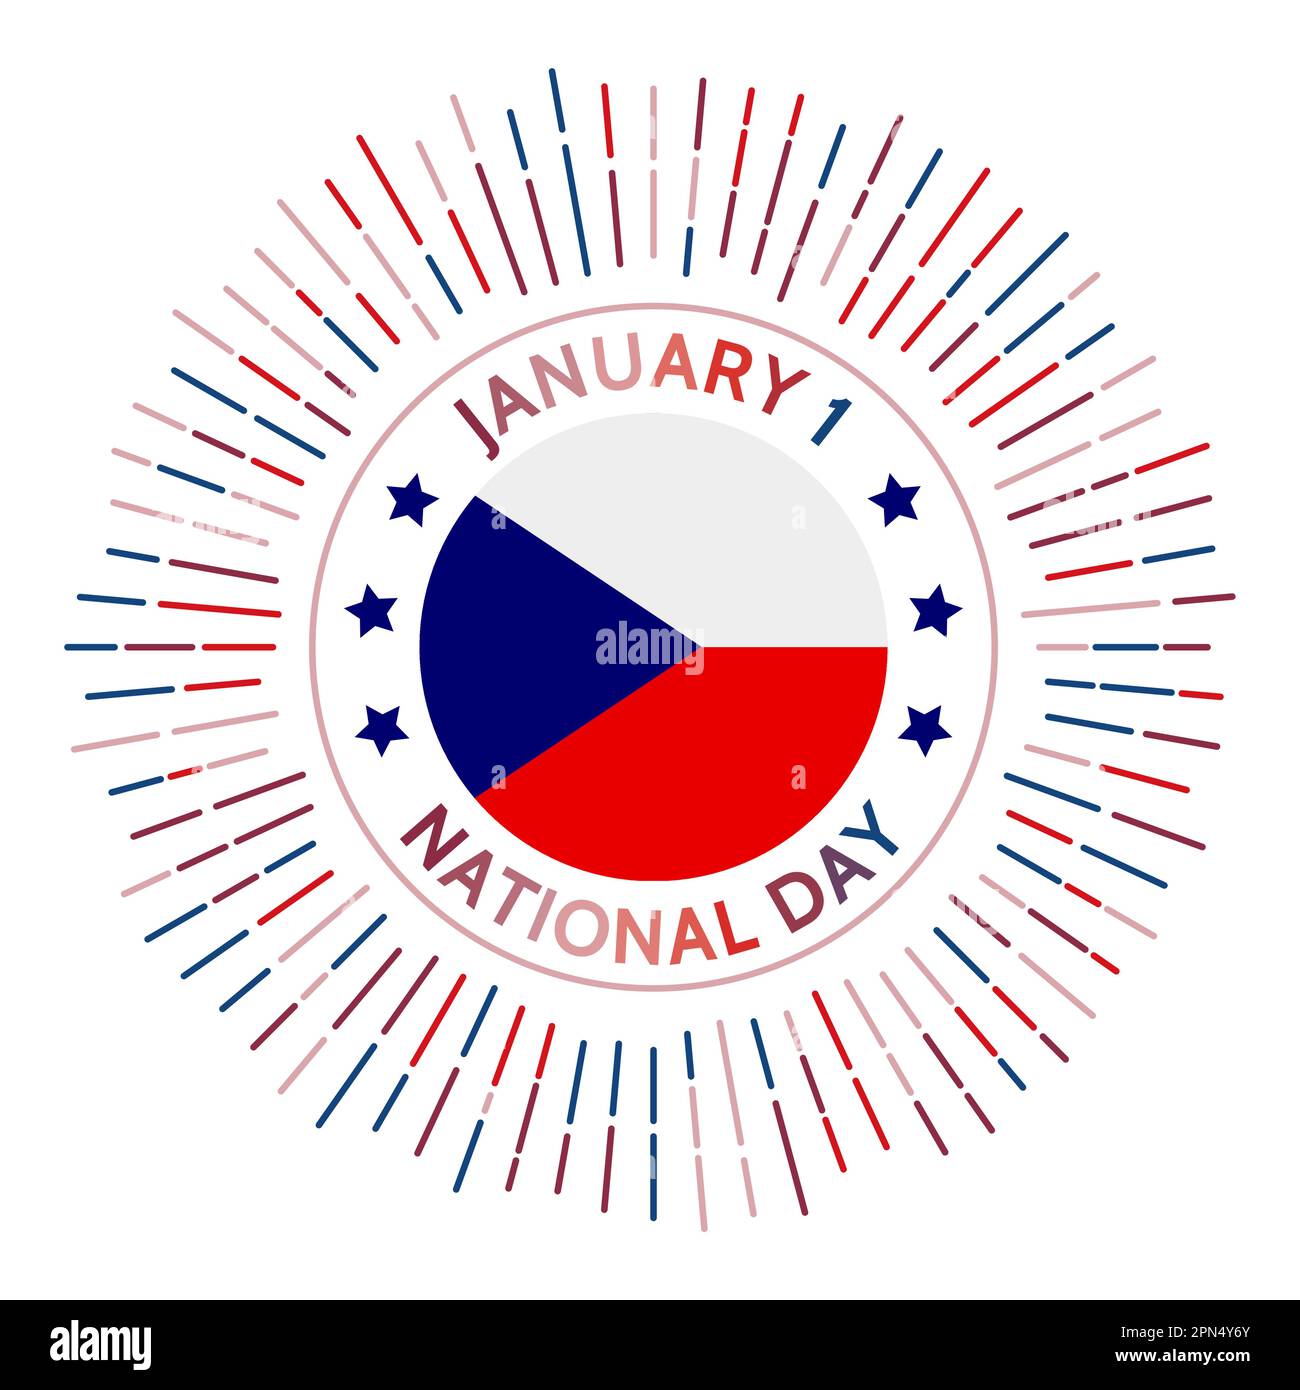 Czech Republic national day badge. Czech Republic after the split of Czechoslovakia in 1993. Celebrated on January 1. Stock Vector